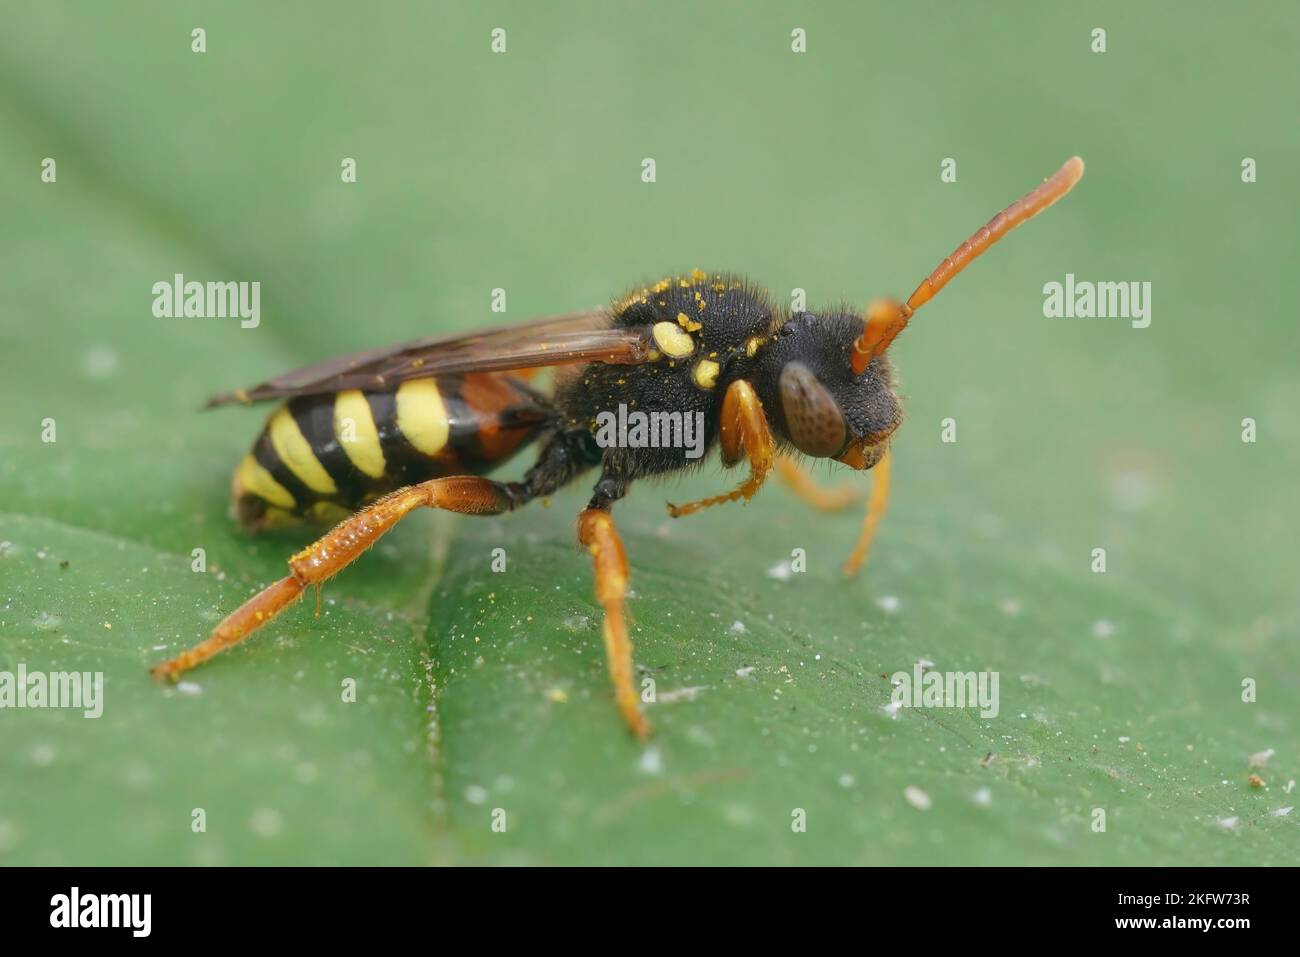 Detailed natural close up of a red-eyed female Painted nomad bee, Nomada fucata on a green leaf Stock Photo